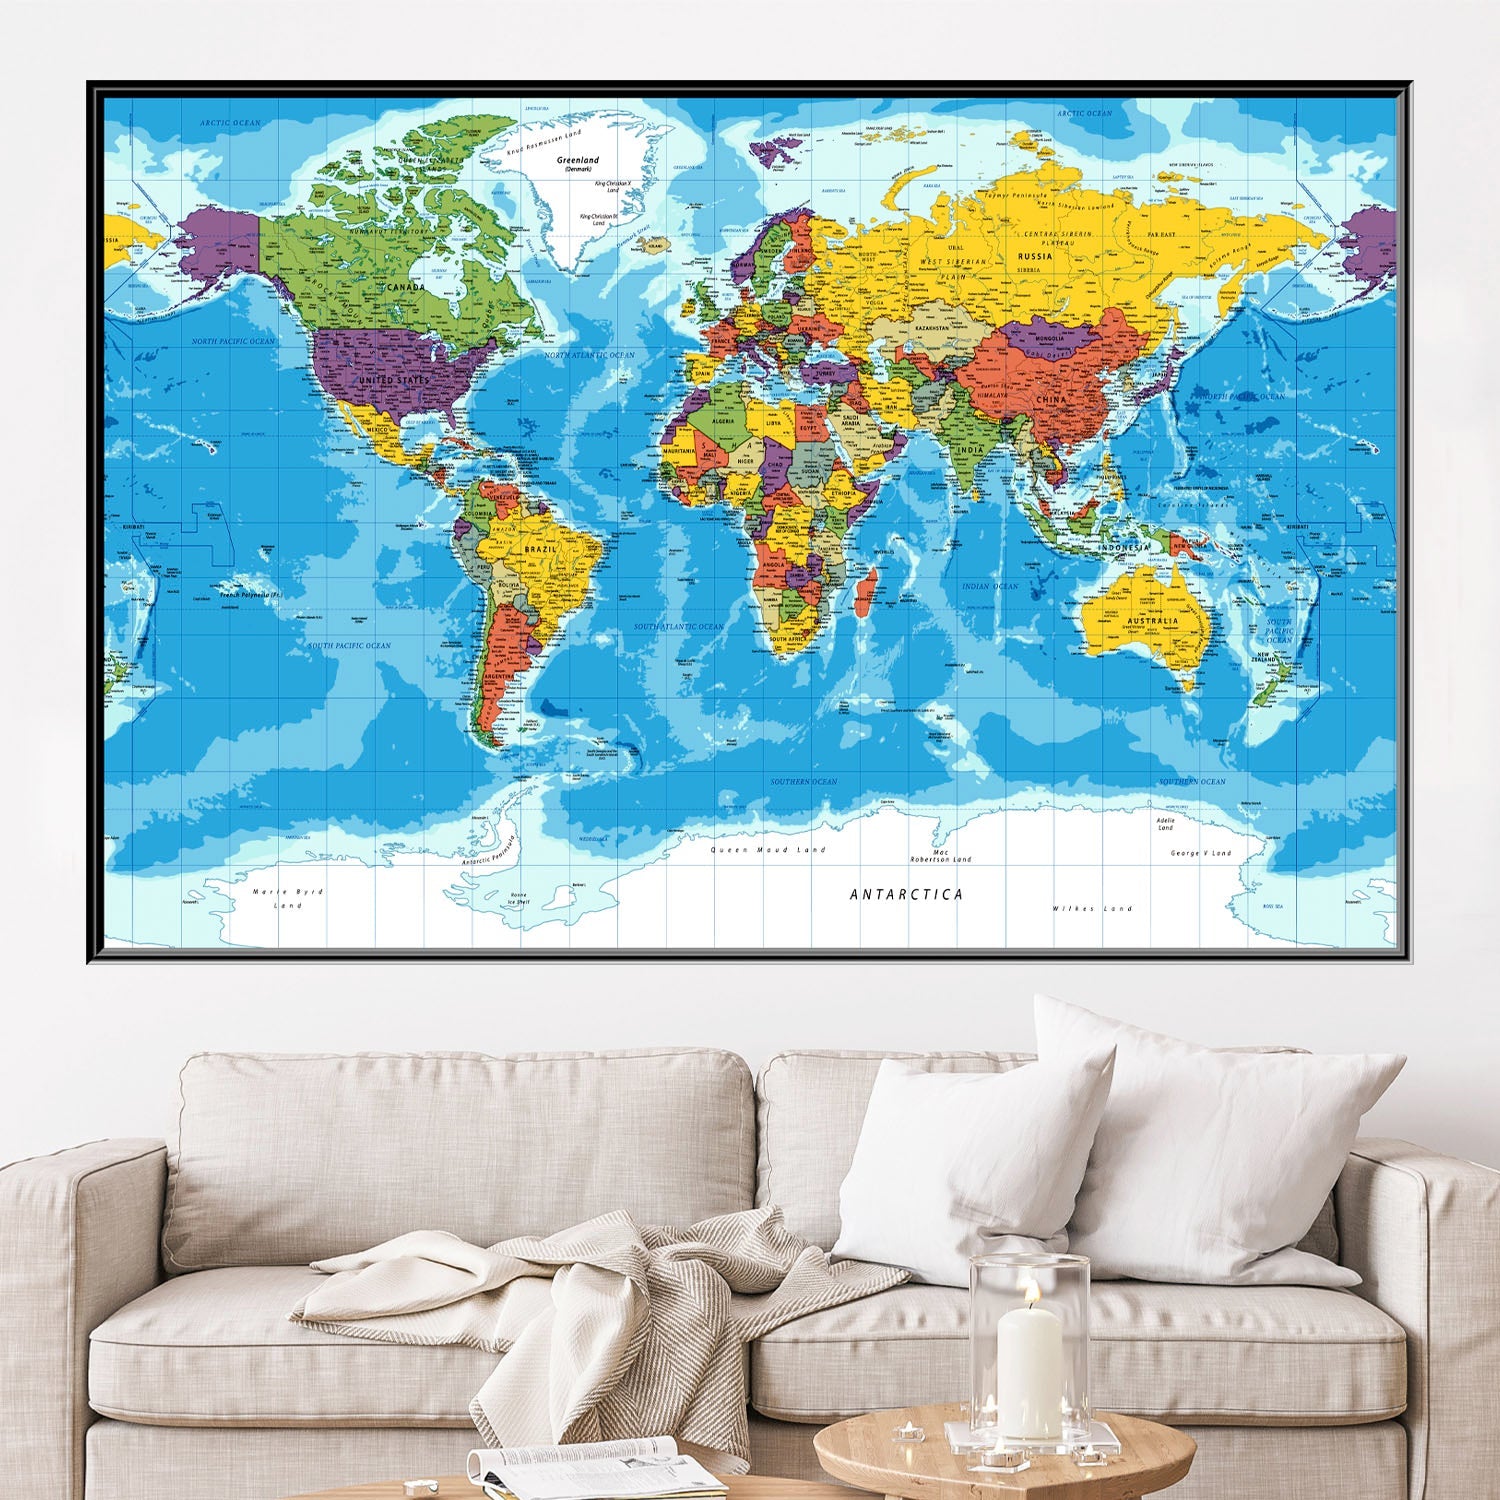 https://cdn.shopify.com/s/files/1/0387/9986/8044/products/MapoftheWorldinColourCanvasArtprintStretched-3.jpg